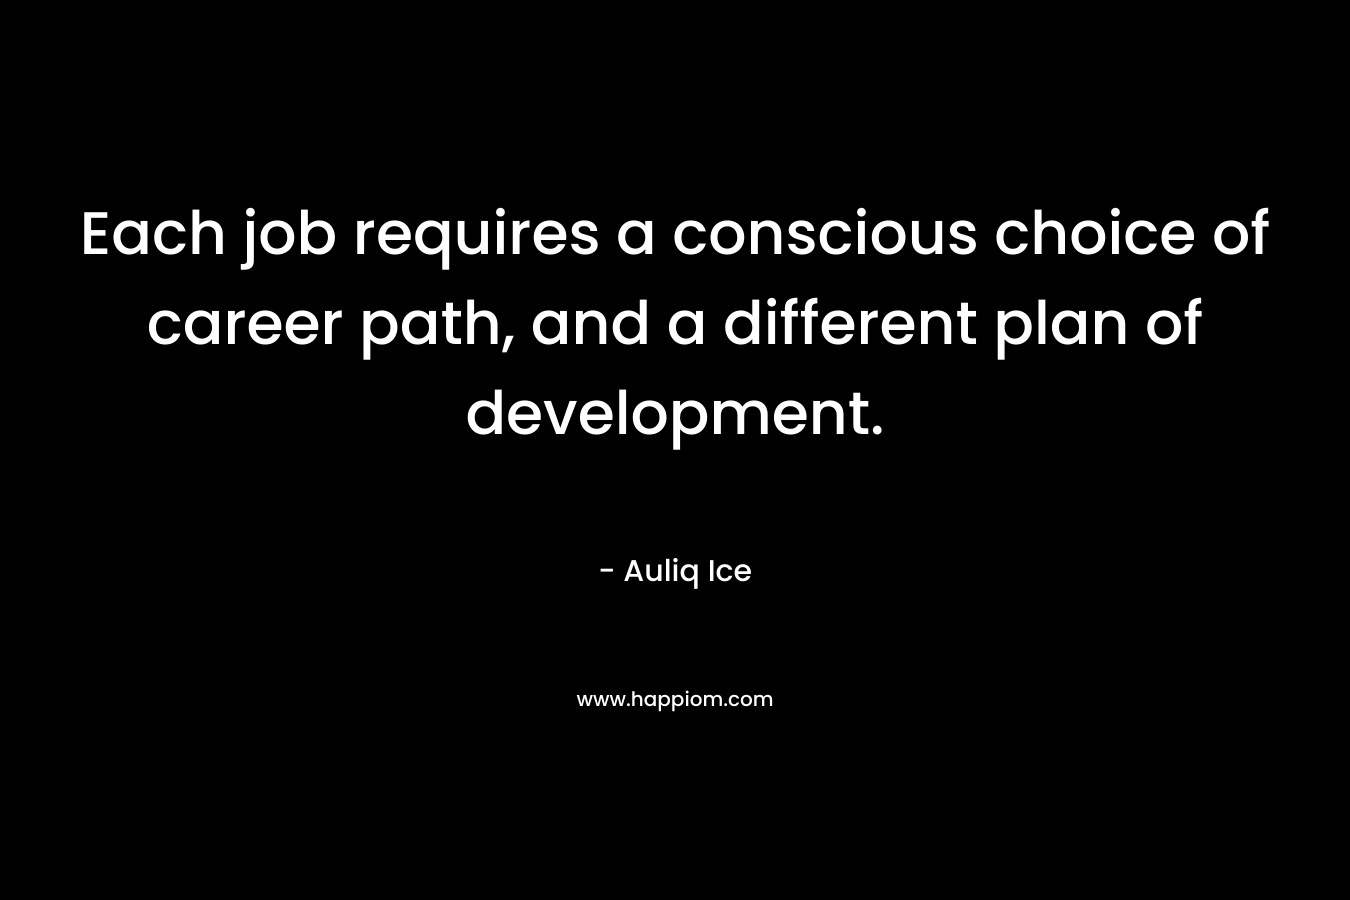 Each job requires a conscious choice of career path, and a different plan of development. – Auliq Ice